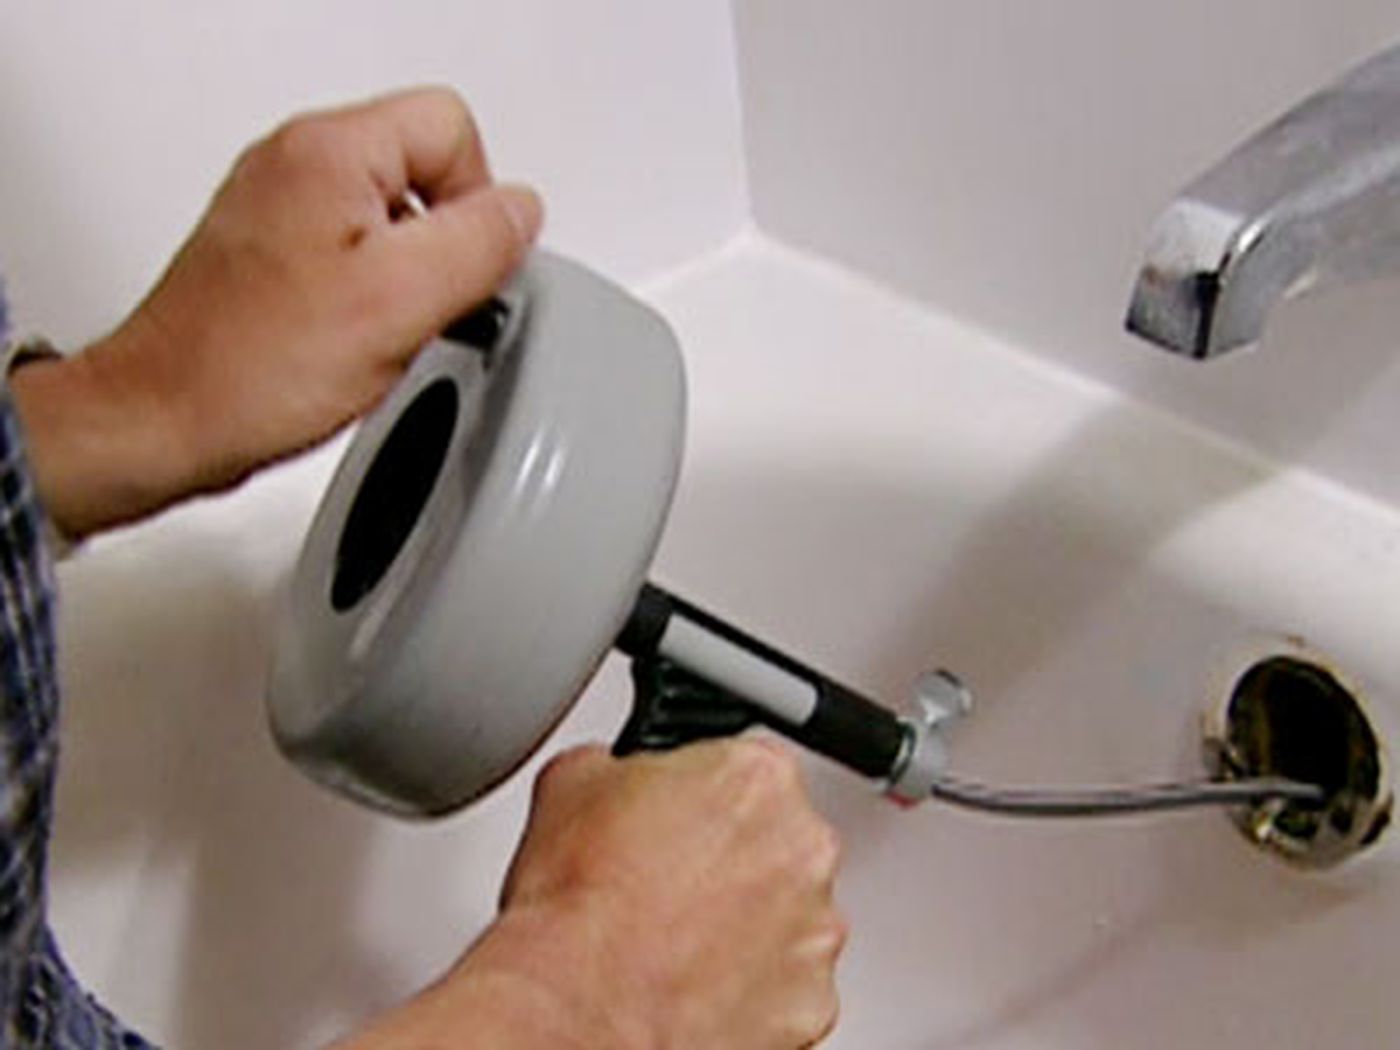 Ways to Unclog a Bathtub Drain Without Harmful Chemicals